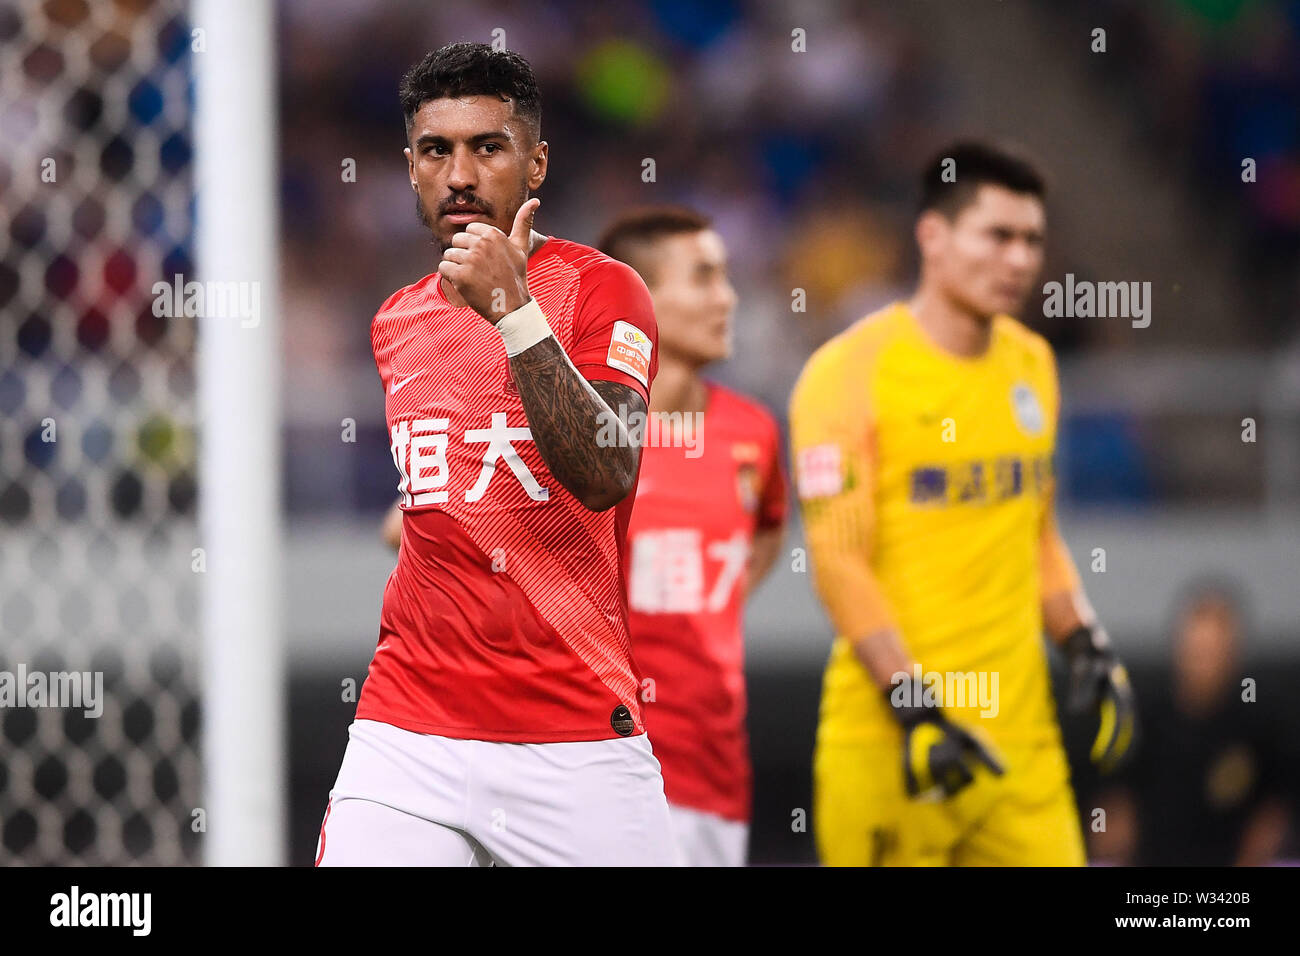 Brazilian football player Paulinho of Guangzhou Evergrande Taobao reacts as he competes against Tianjin TEDA in their 17th round match during the 2019 Chinese Football Association Super League (CSL) in Tianjin, China, 11 July 2019. Guangzhou Evergrande Taobao defeated Tianjin TEDA 3-0. Stock Photo